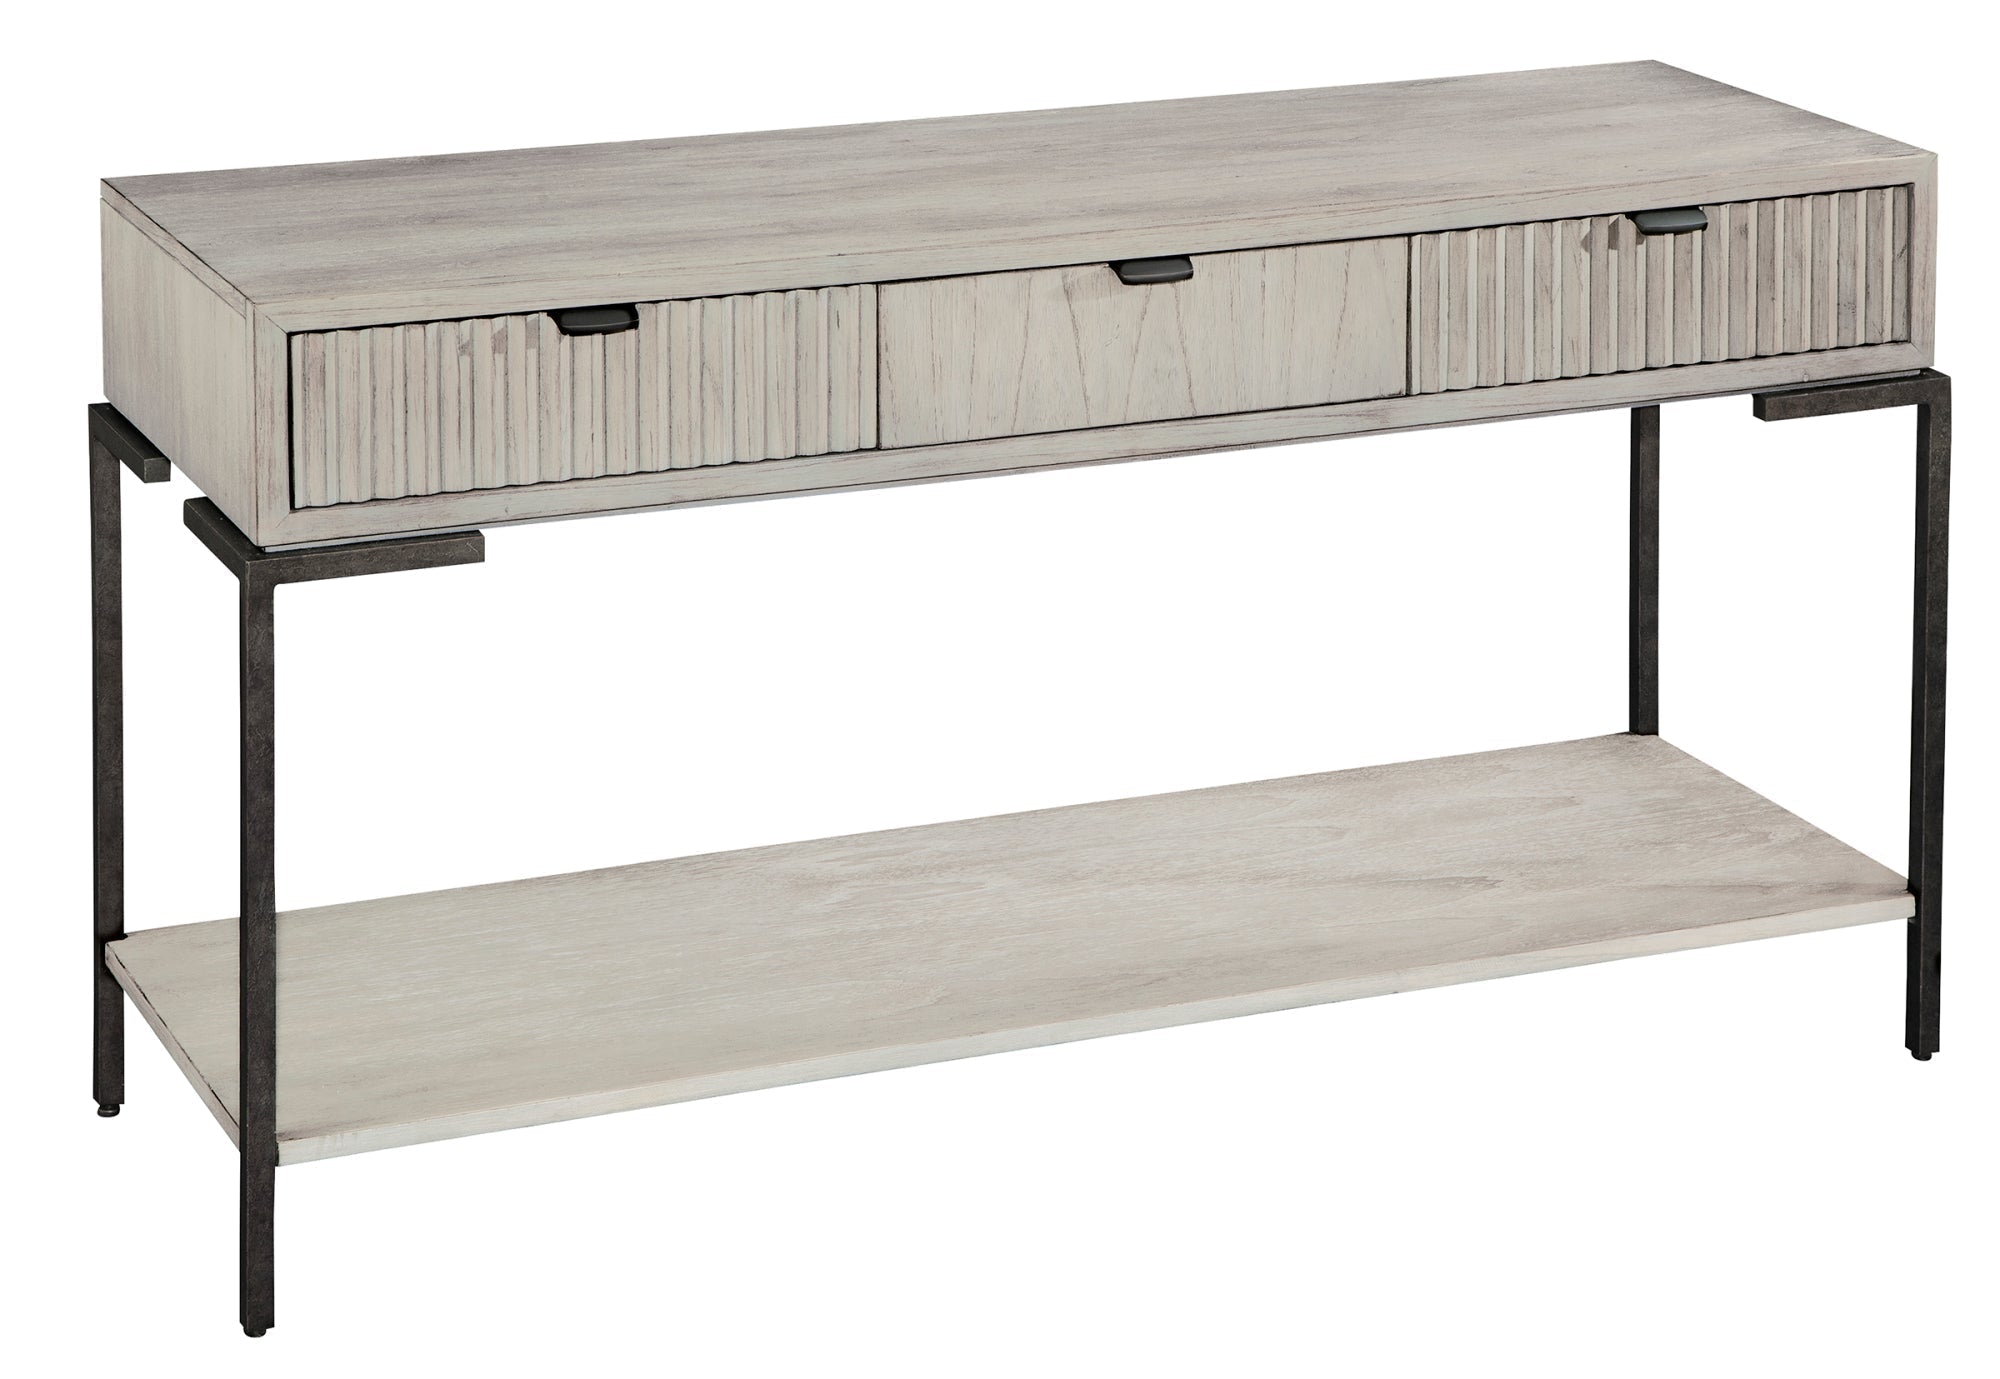 Sierra Heights Sofa Table With Drawers - Furniture - Tipplergoods